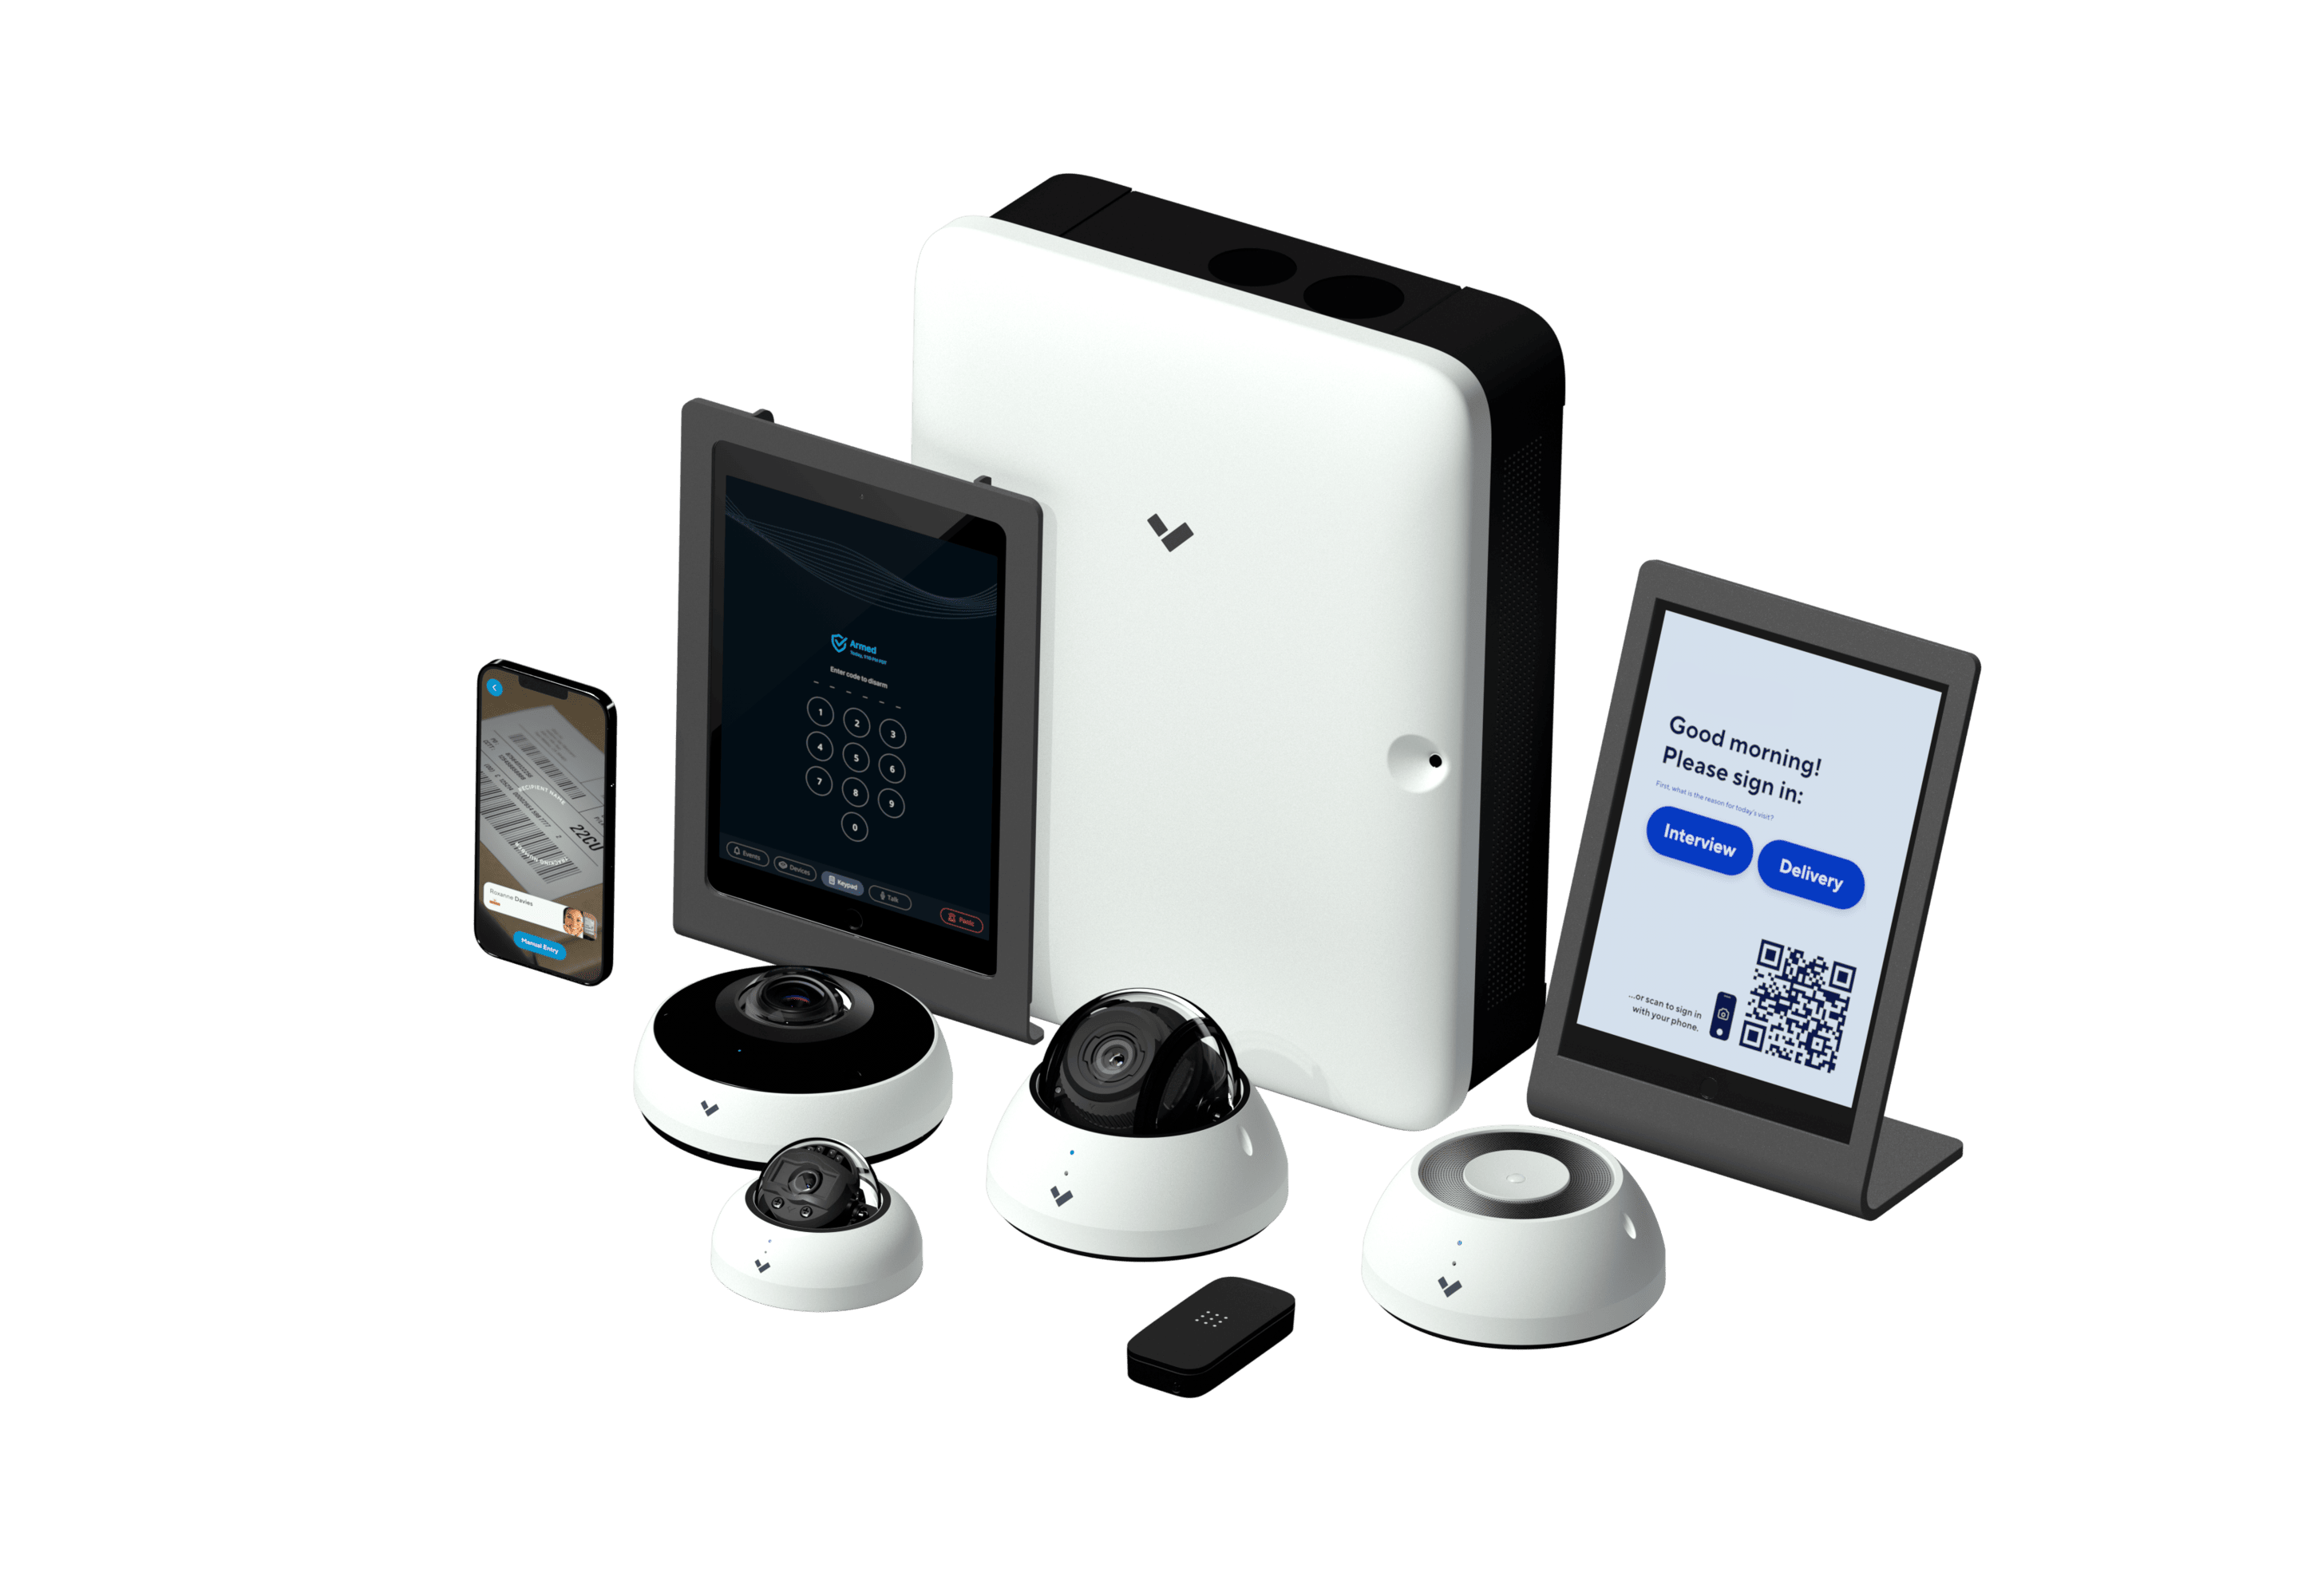 Verkada Device Family used for cannabis security solutions